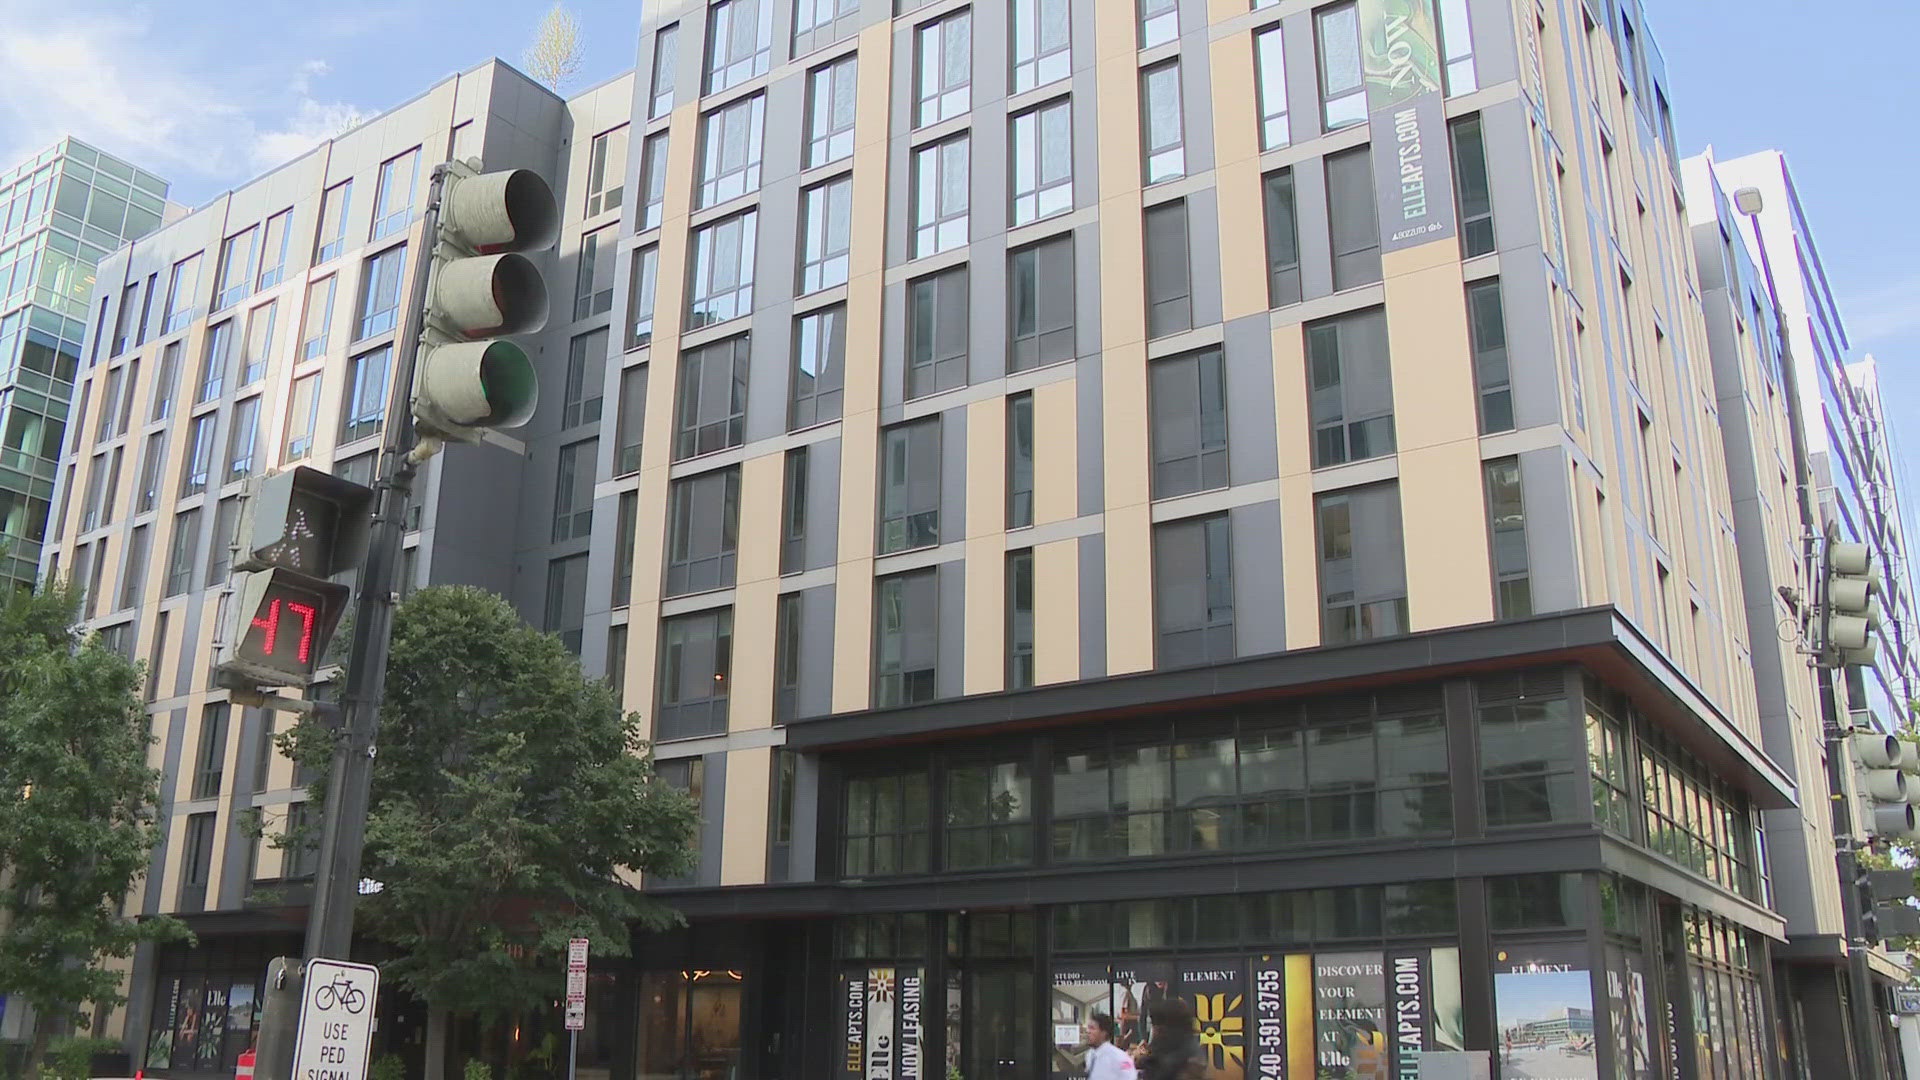 Studio apartments in the new building will run you around $3,000.